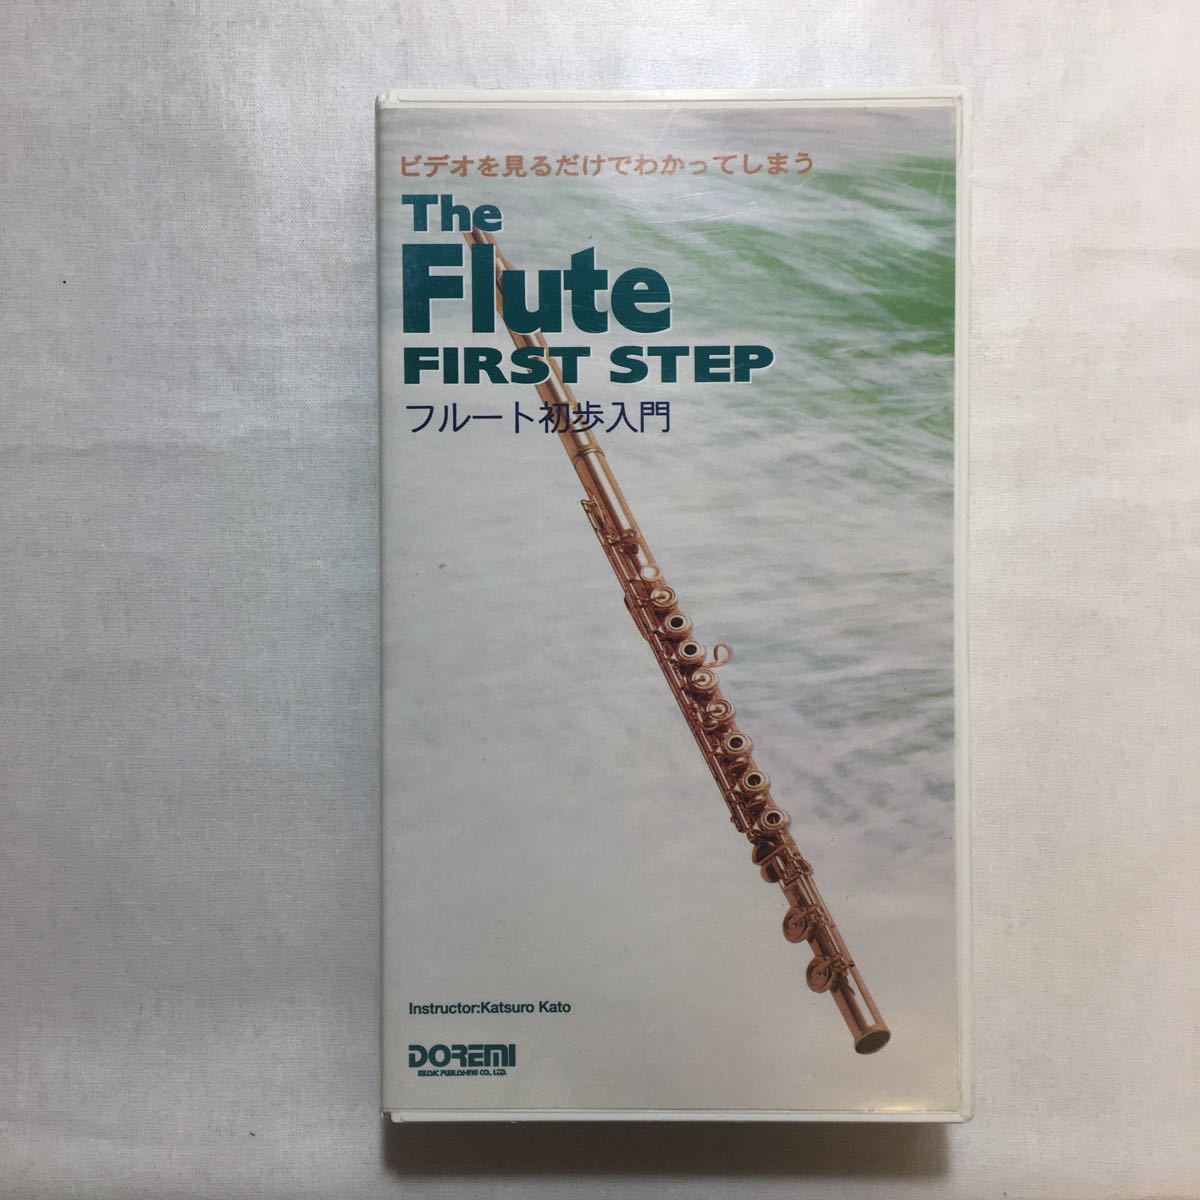 zvd-01! video flute the first . introduction (doremi* video * master * series ) musical score 1998/12/10 [VHS] video 